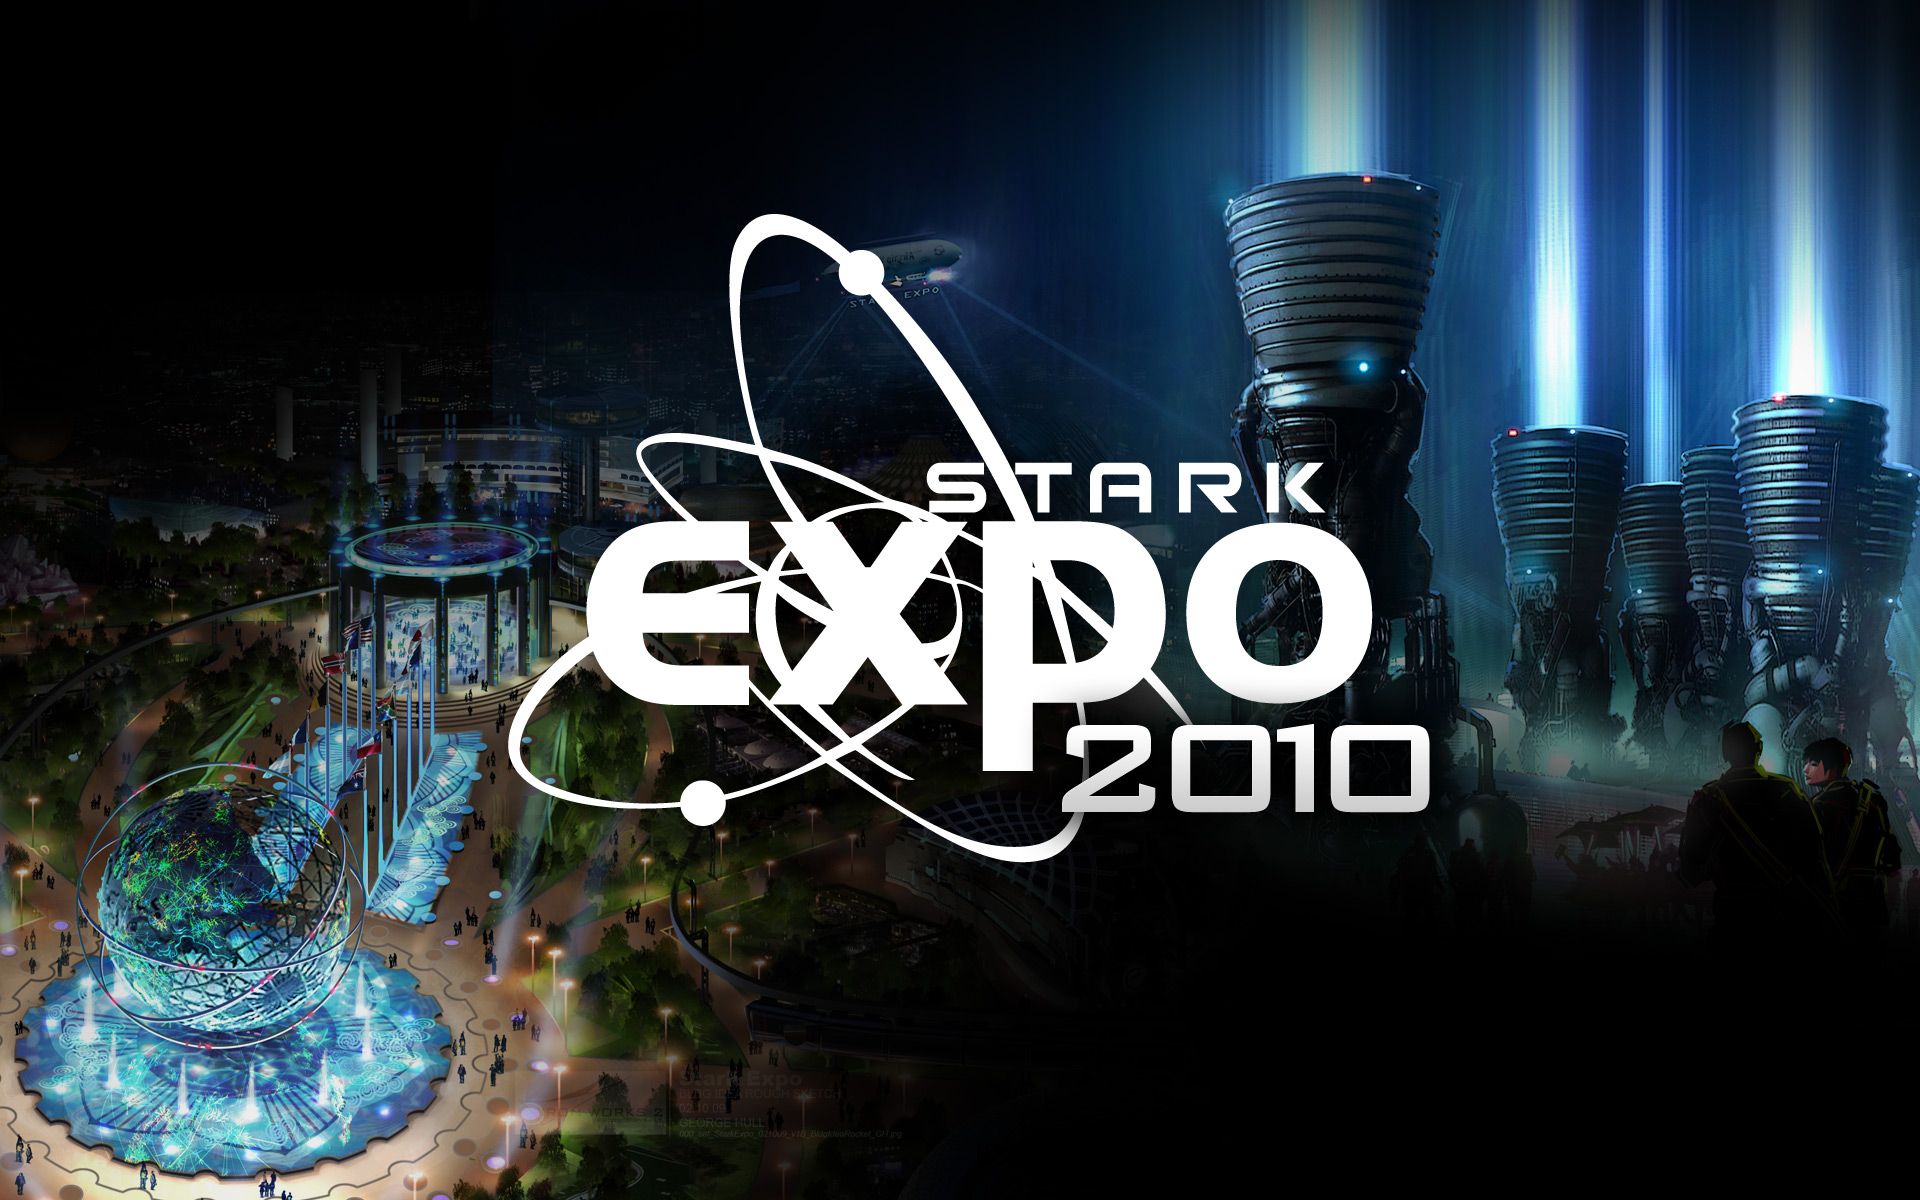 IRON MAN 2 Viral Campaign Puts Stark Expo 2010 on Your Calendar